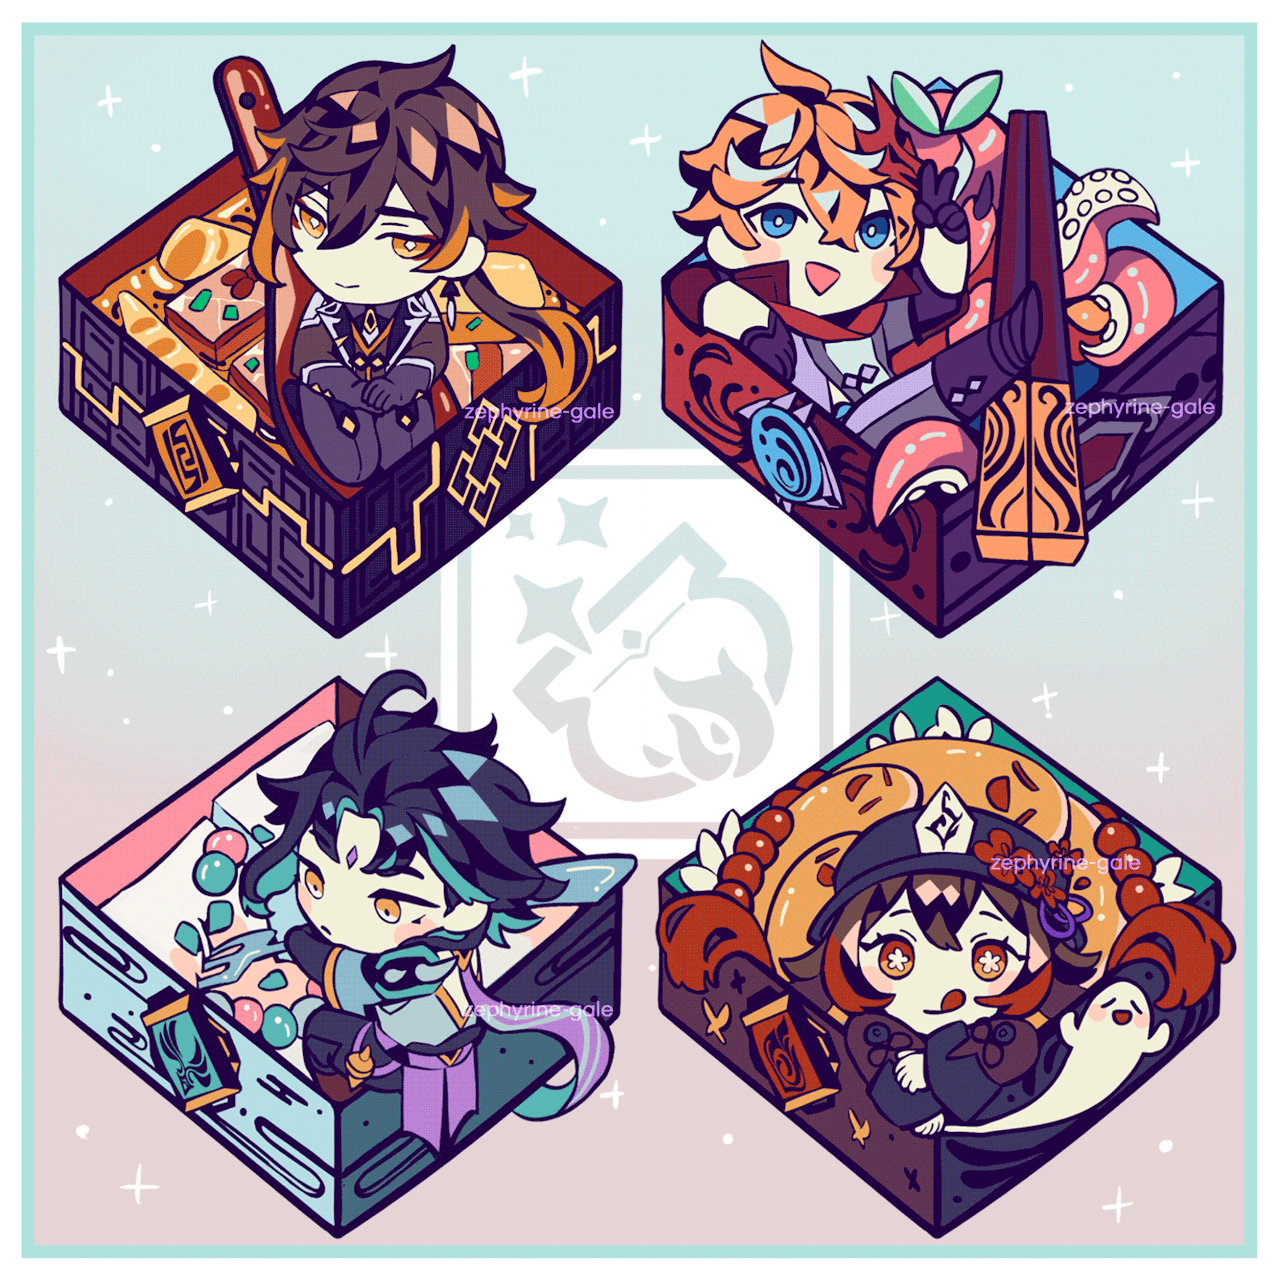 lunchbox pins pre-orders will open tomorrow May 1st 10AM (CDT) !
i’ll also have some prints up for pre-order ♡   
link below ! rbs are appreciated   ♡ #genshin impact#zhongli#childe#xiao#hu tao#my art#merch #pin time pin time  #i also wanna make some more stickers  #there;ll be a freebie sticker with any pin orders !!  #i spent so long trying to get everything right ajdfkjgh